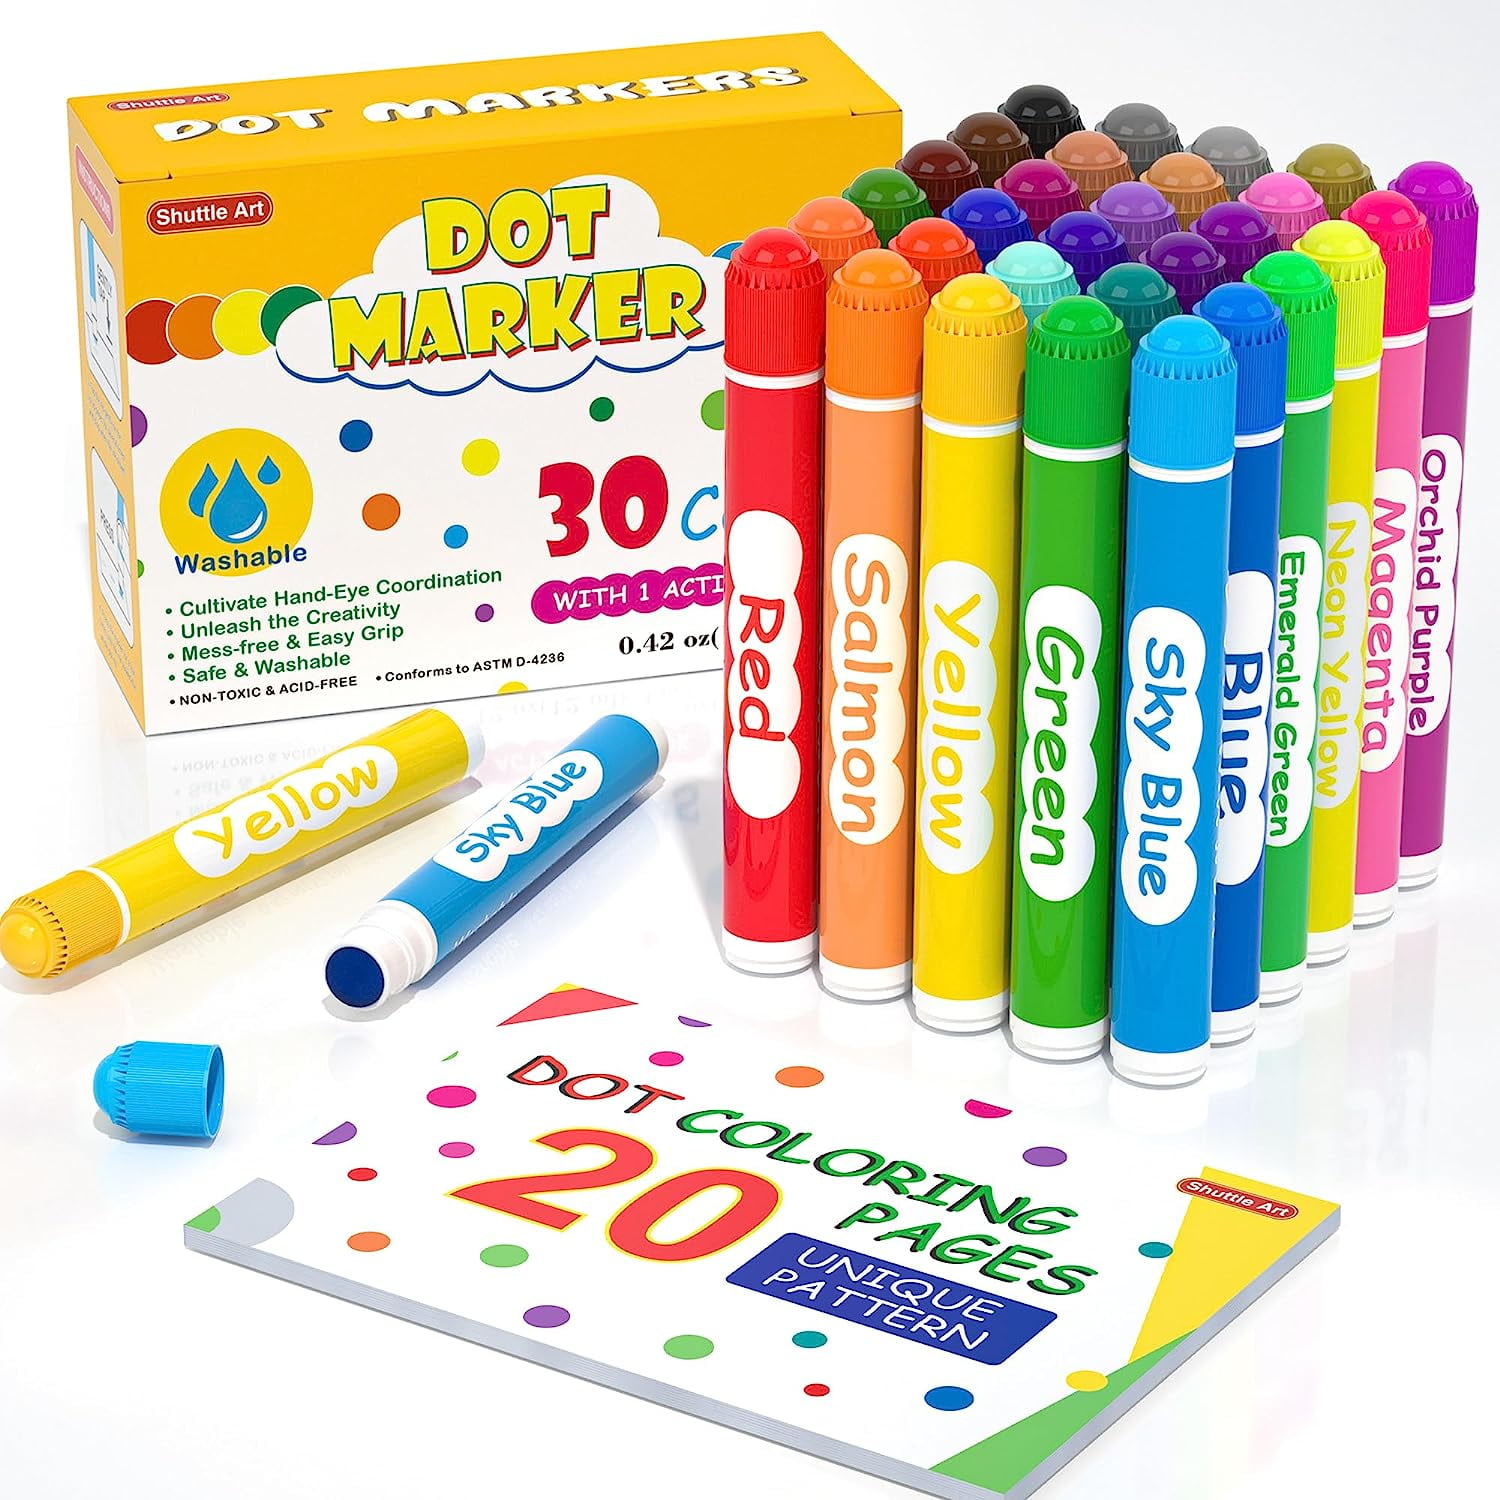 Pens,, 2pcs/Set Water Pen Water Markers For Drawing Kids Gift For Painting  Mat